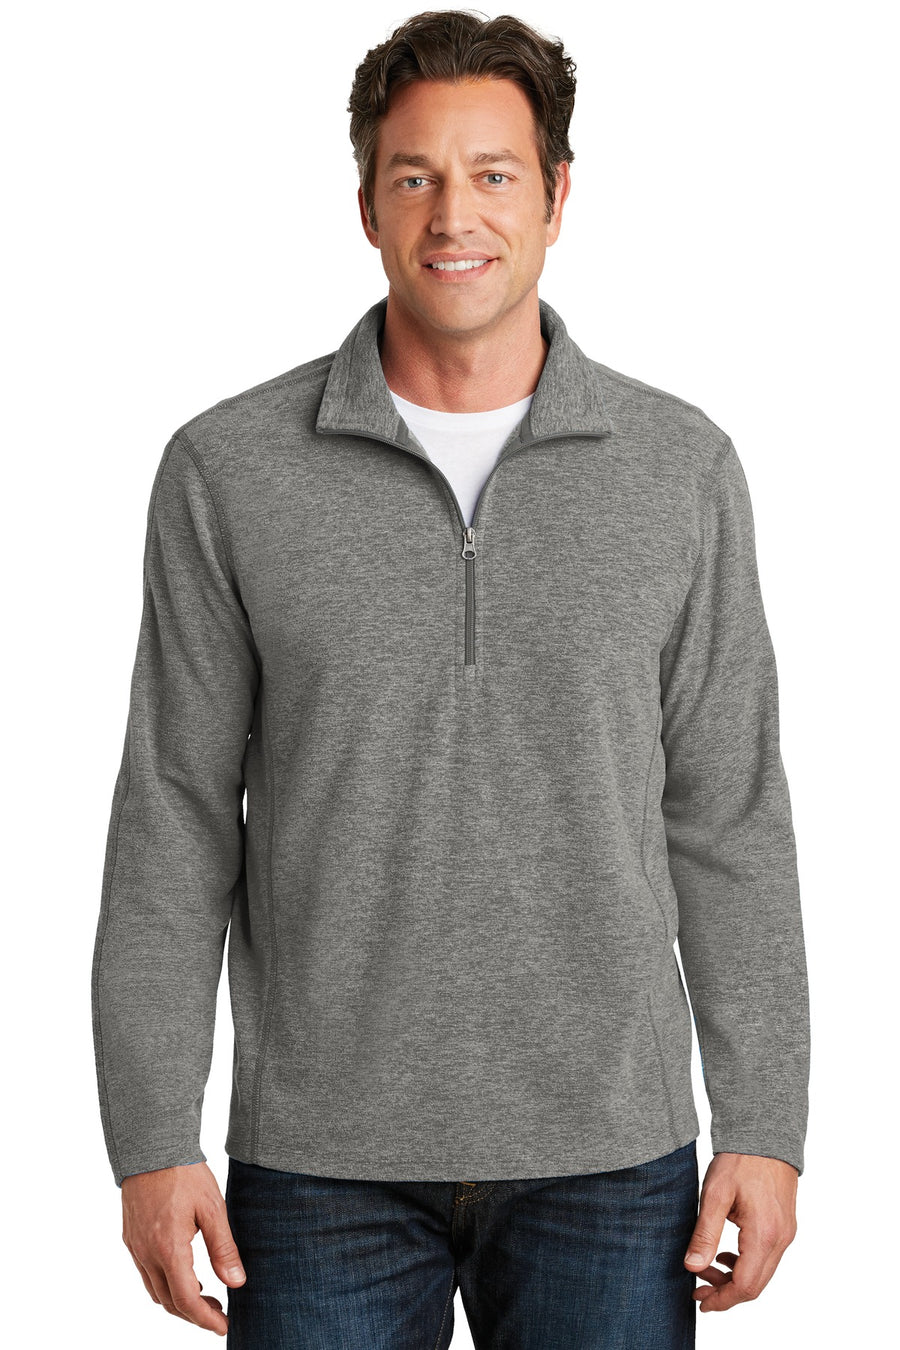 F234-Pearl Grey Heather-front_model